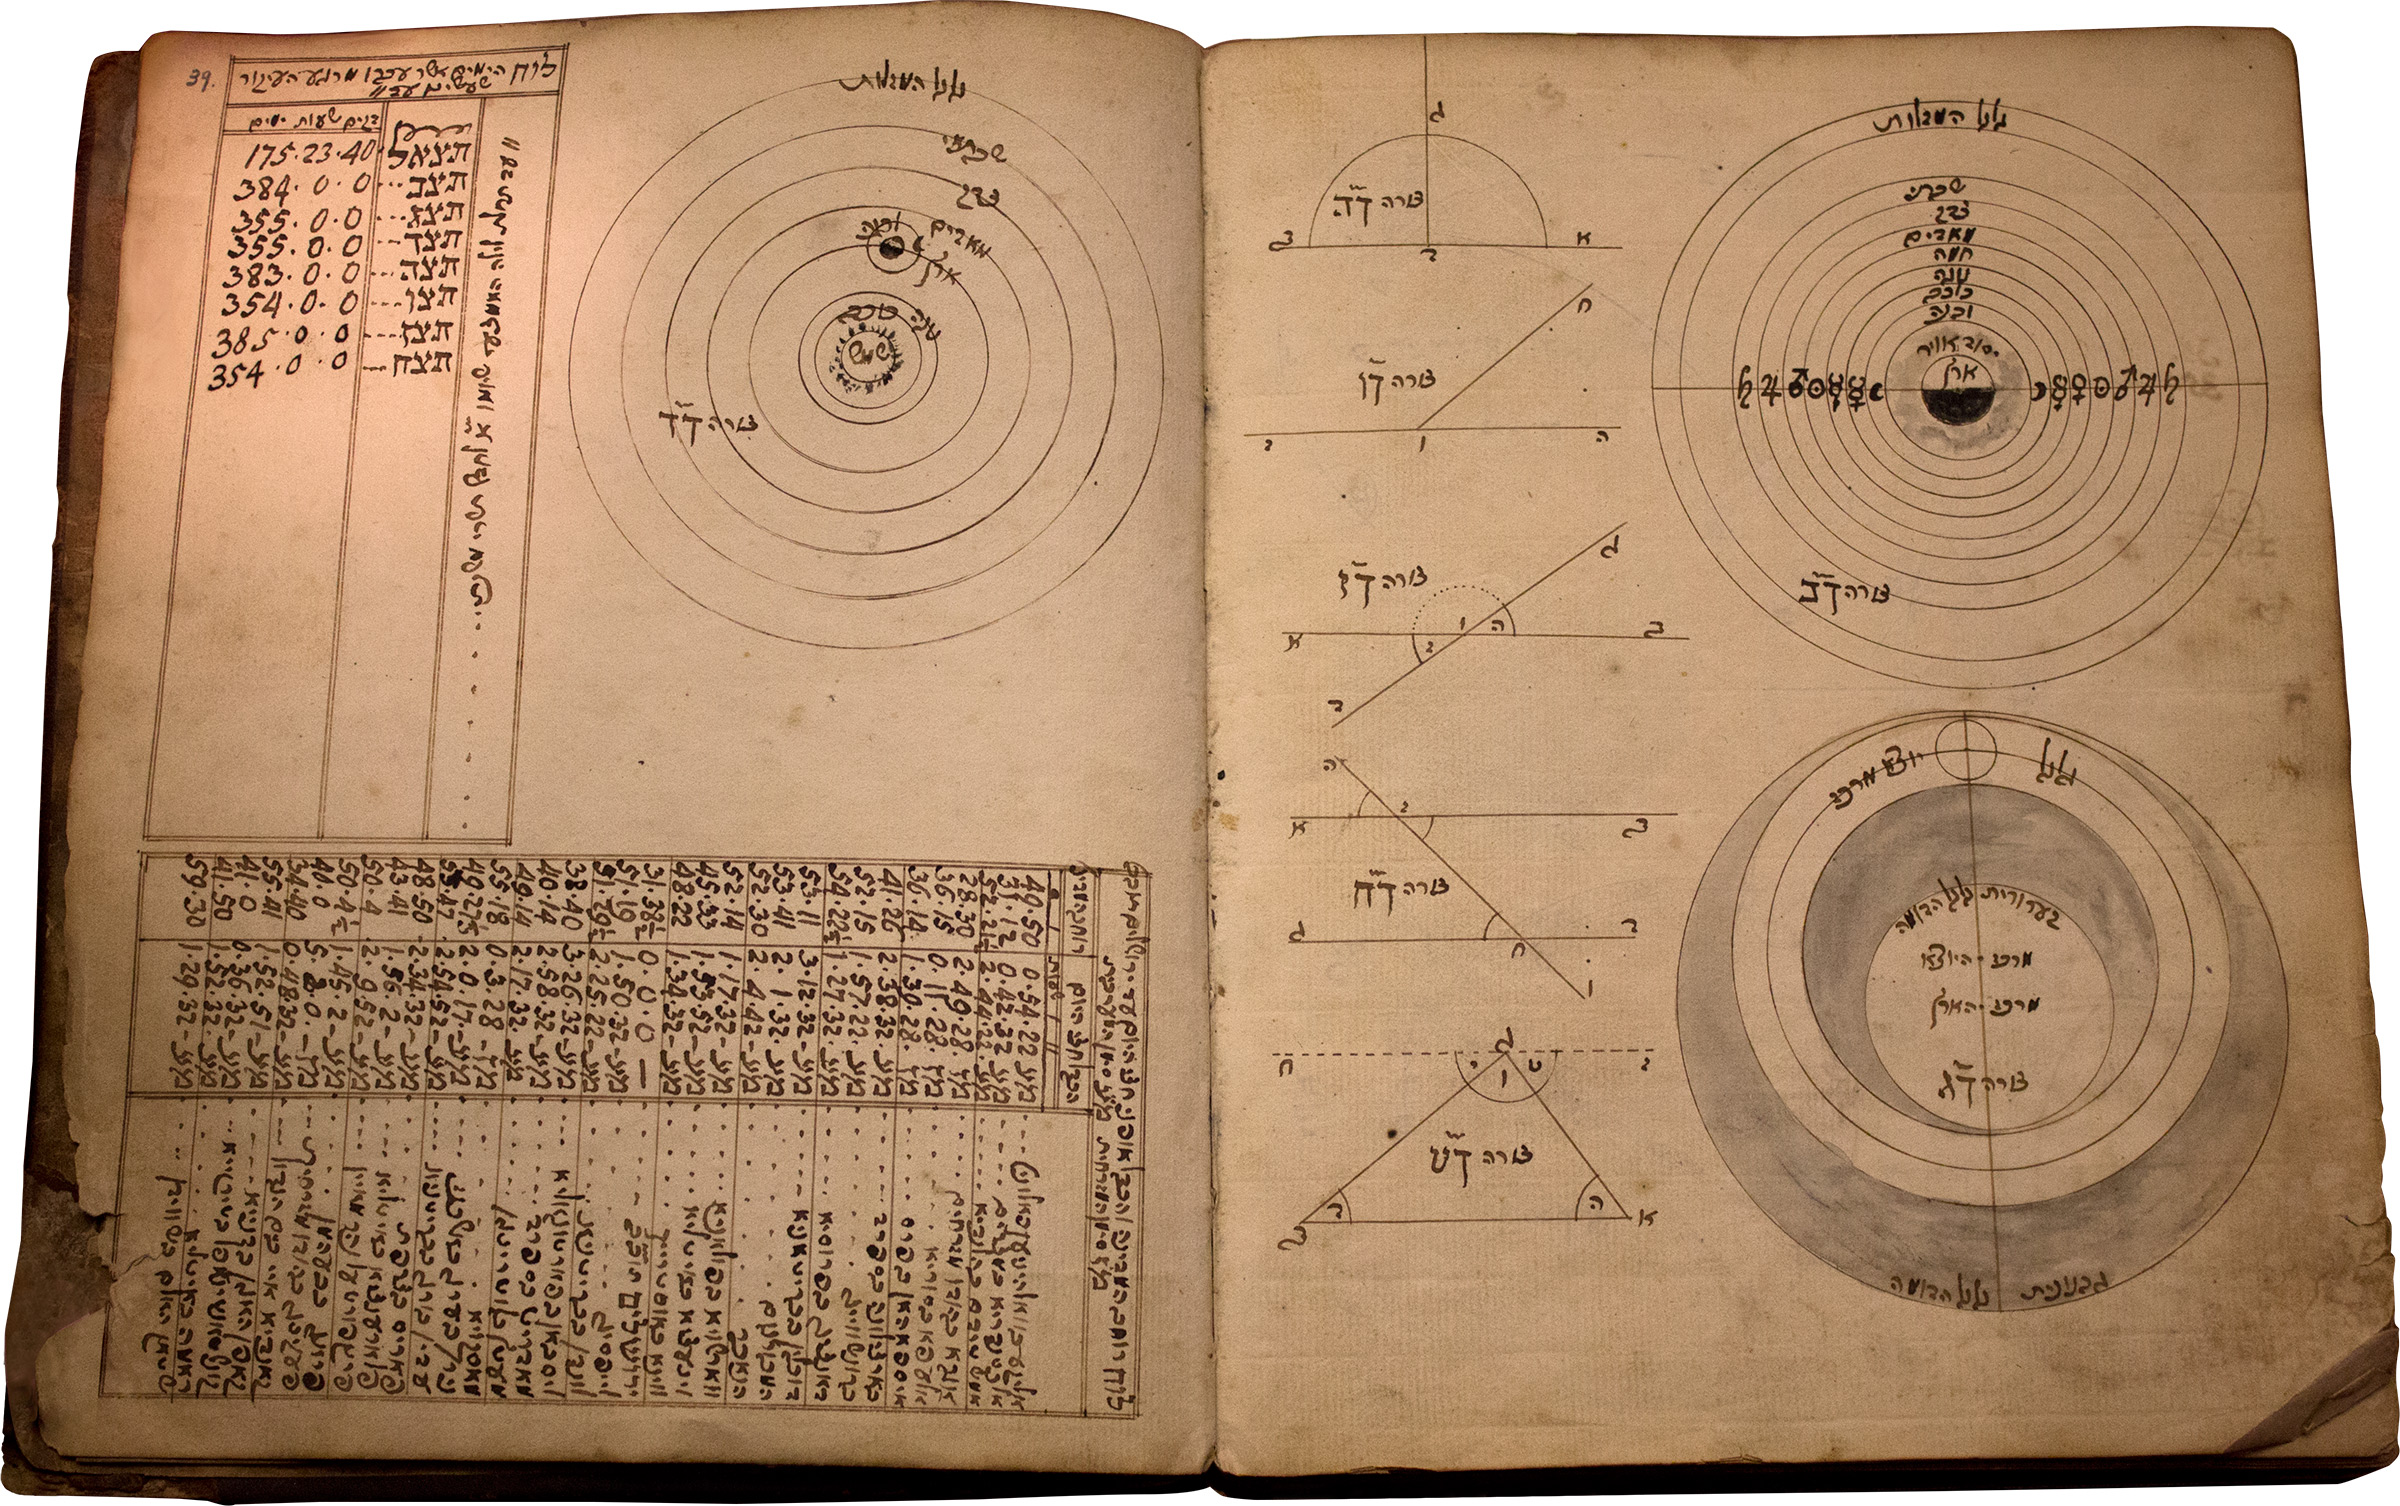 Opening showing illustrations of both Ptolemaic and Copernican systems